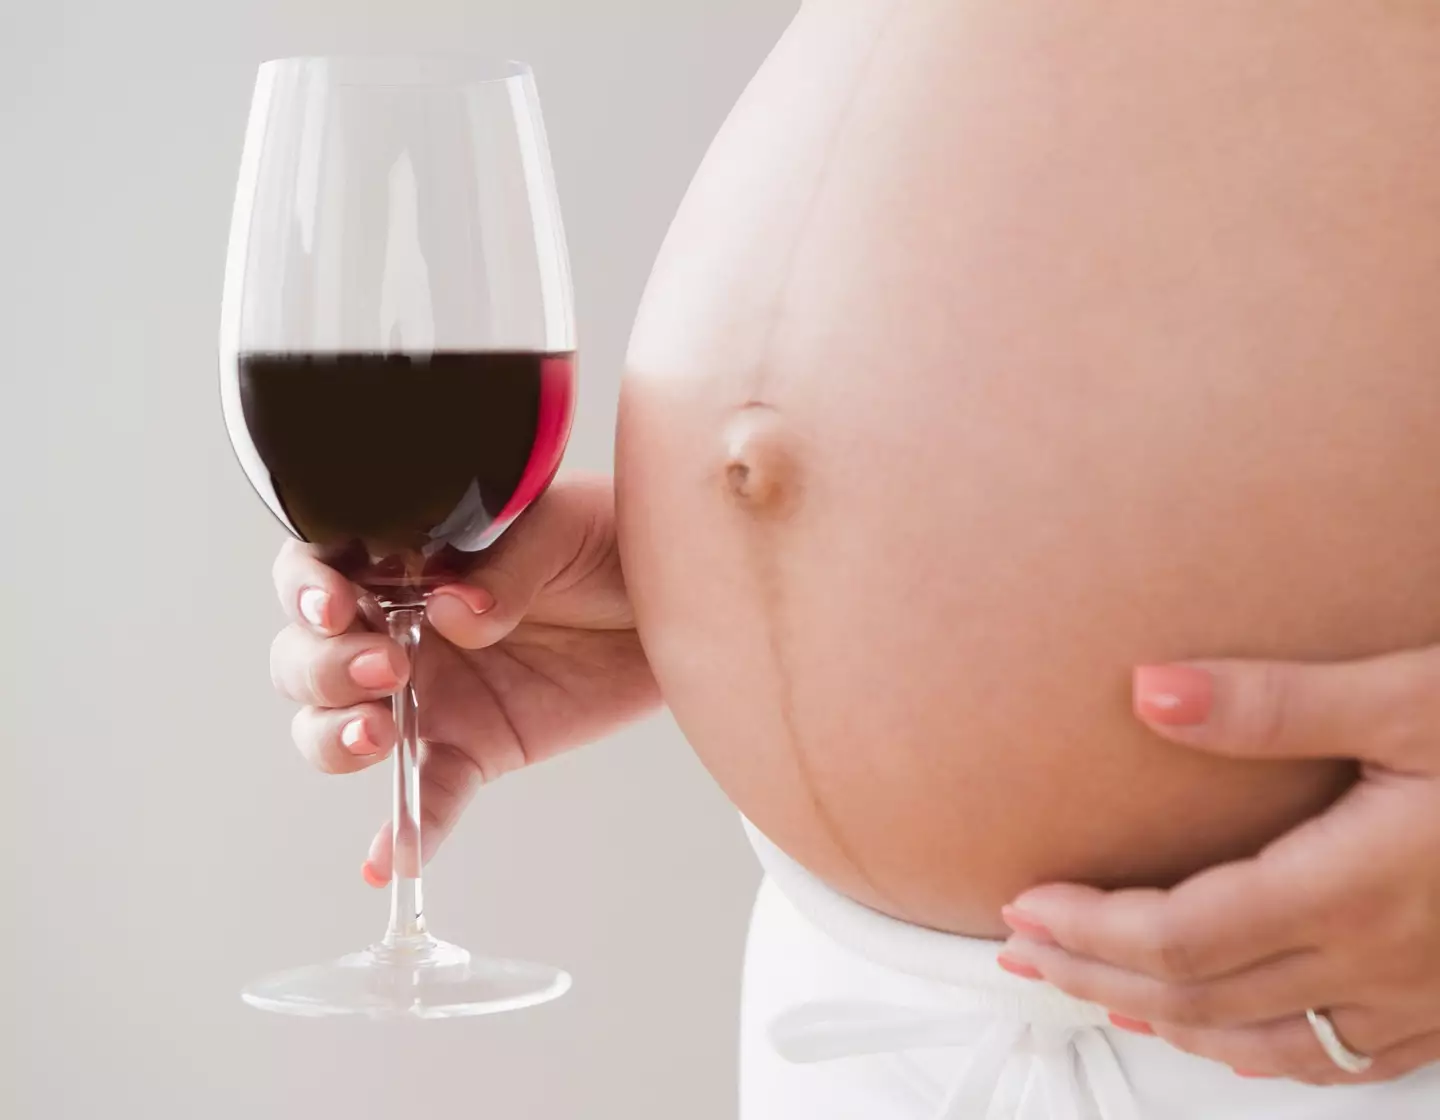 Doctors are being advised to record every alcoholic beverage that a pregnant woman drinks during her pregnancy (